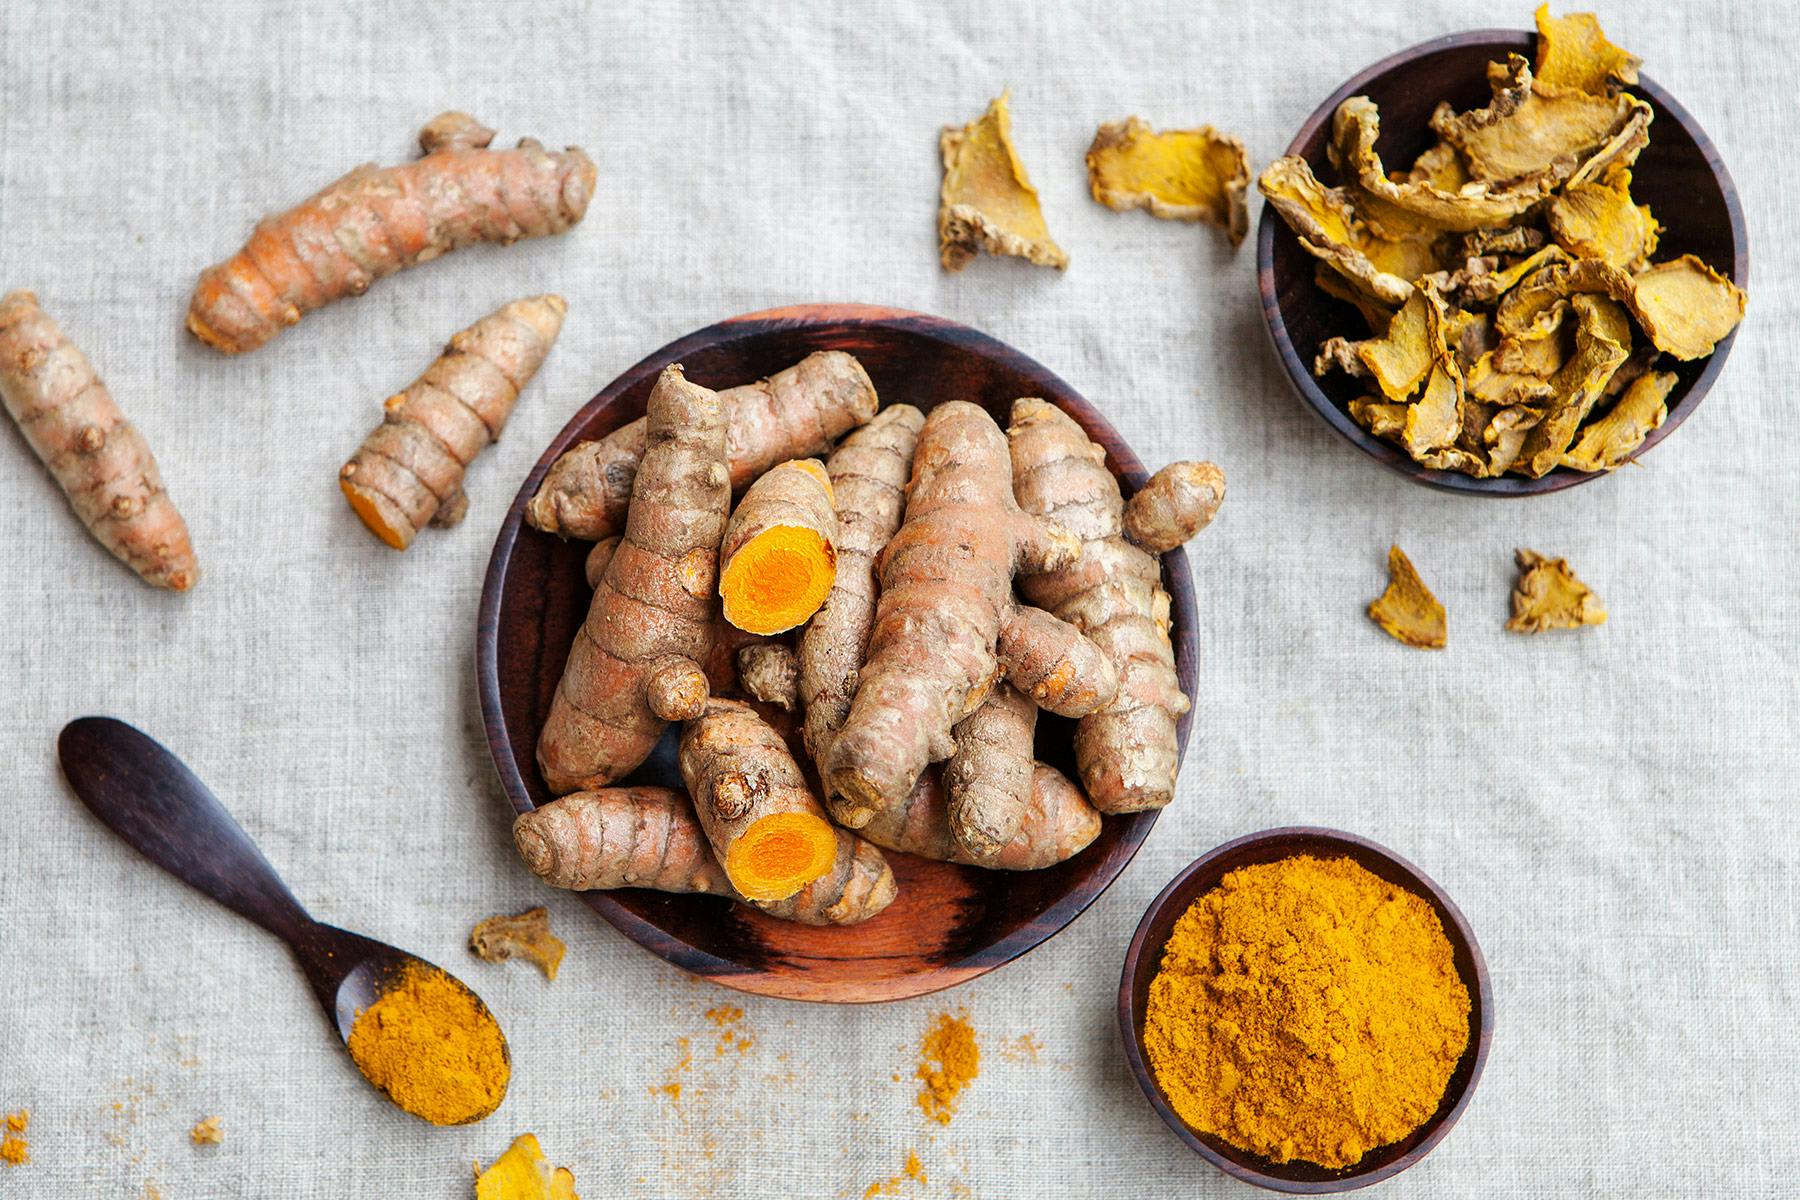 The Second Globalization of Turmeric